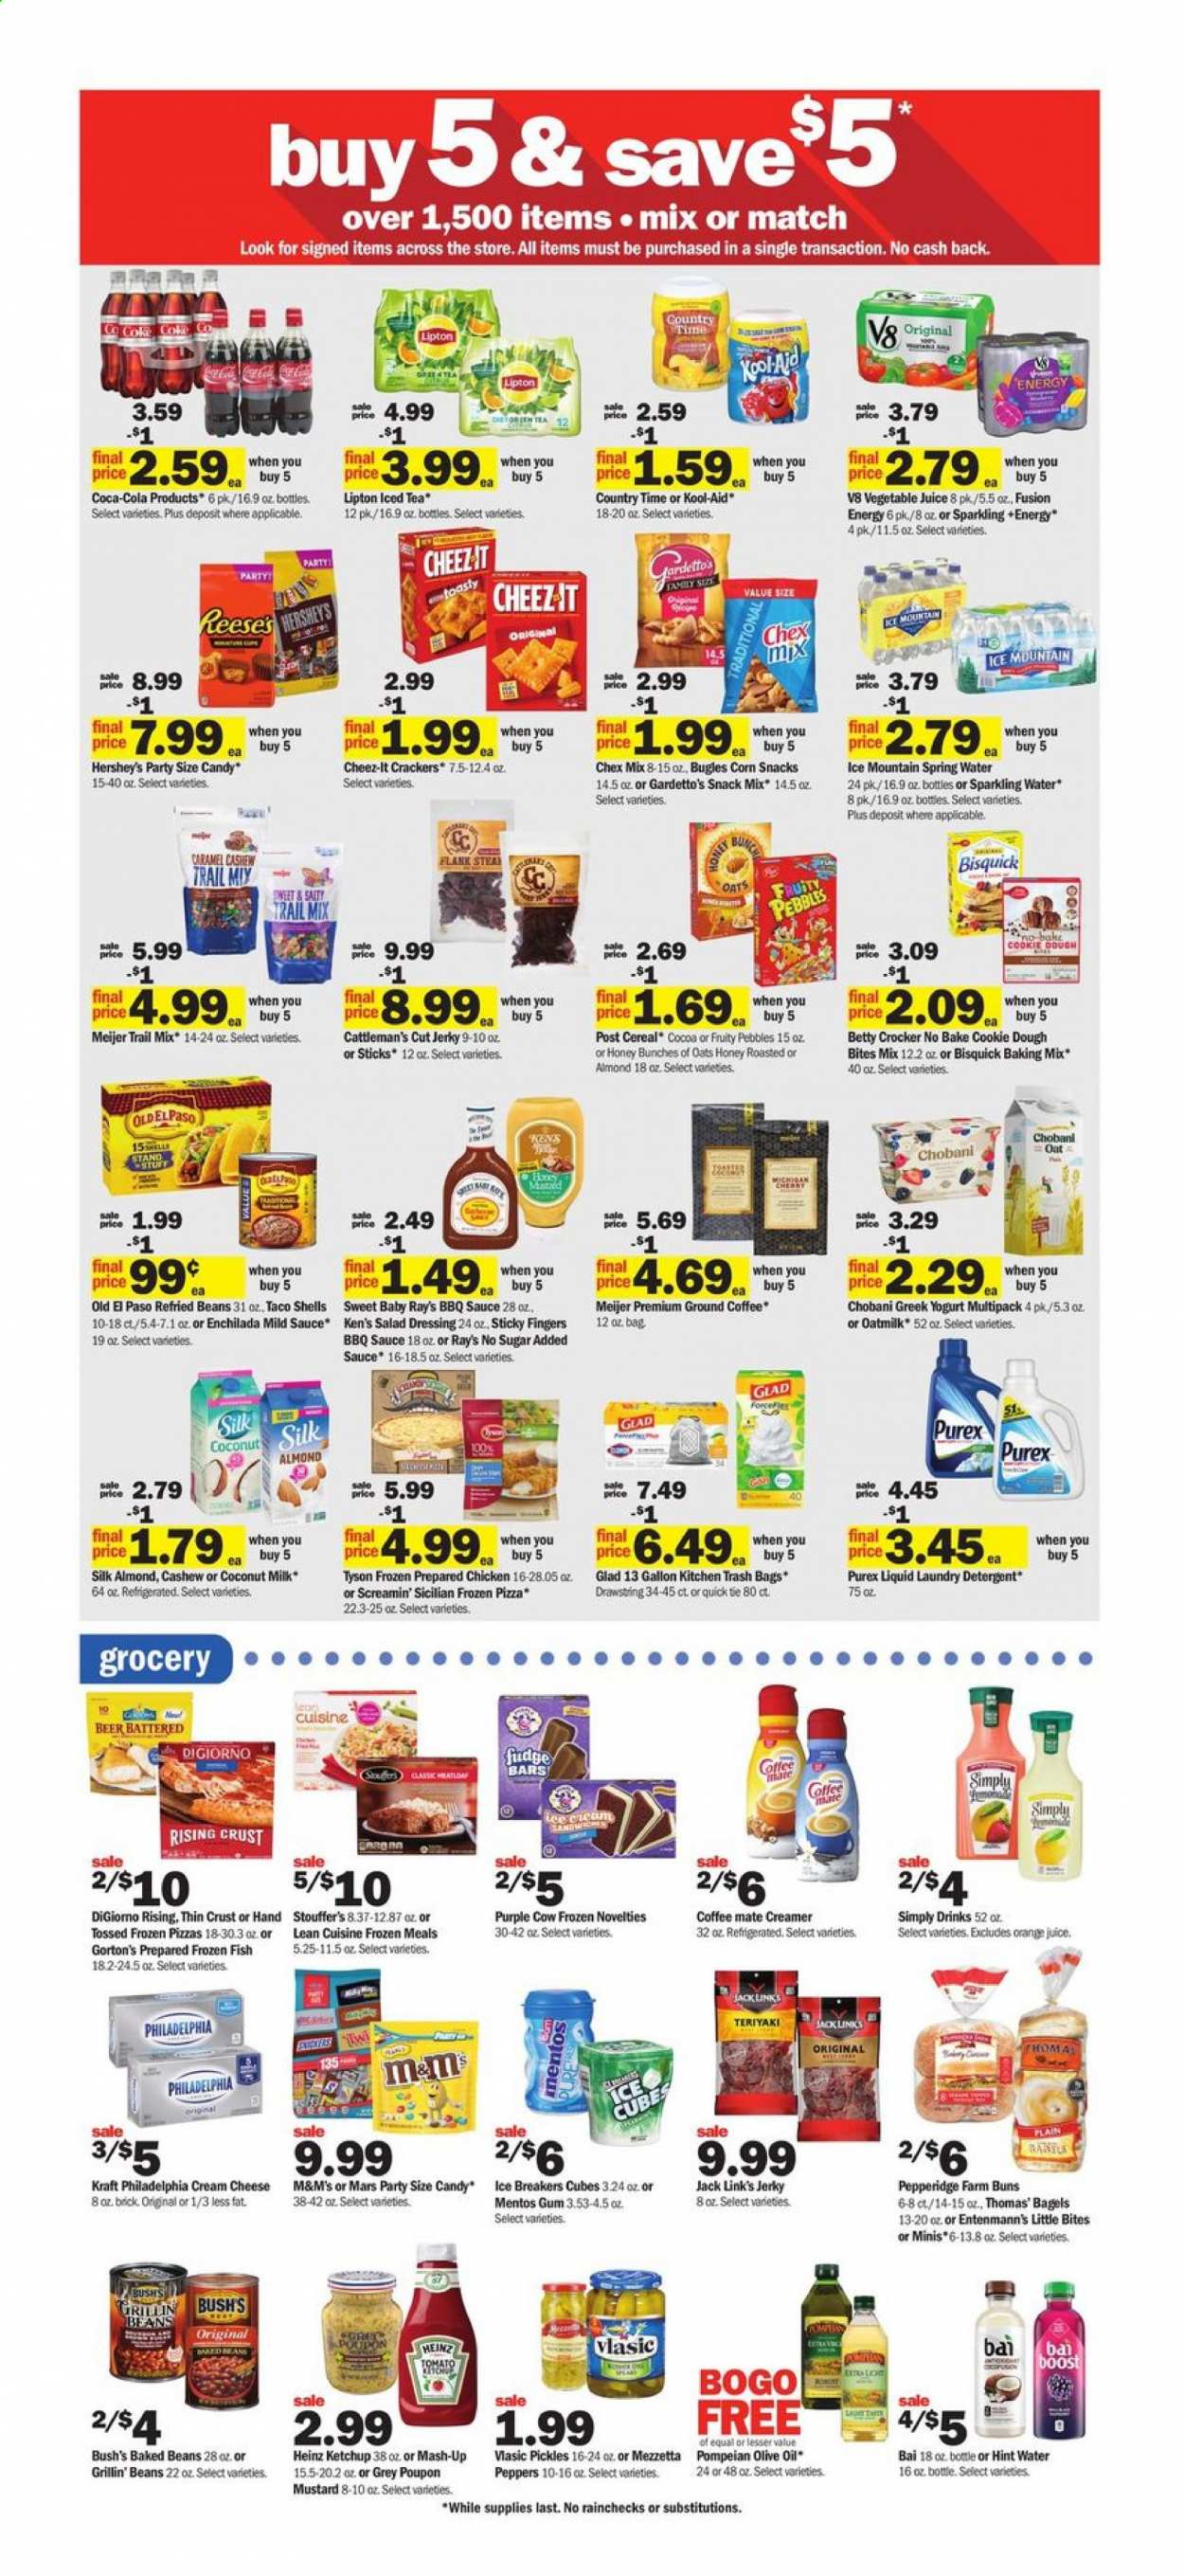 thumbnail - Meijer Flyer - 07/04/2021 - 07/10/2021 - Sales products - bagels, buns, Old El Paso, Entenmann's, corn, peppers, cherries, fish, Gorton's, pizza, sauce, Lean Cuisine, Kraft®, jerky, Philadelphia, greek yoghurt, yoghurt, Chobani, Coffee-Mate, oat milk, creamer, Reese's, Hershey's, ice cubes, Stouffer's, Screamin' Sicilian, cookie dough, fudge, snack, Mentos, Mars, M&M's, crackers, Little Bites, Cheez-It, Jack Link's, Chex Mix, Bisquick, coconut milk, refried beans, Heinz, pickles, baked beans, cereals, Fruity Pebbles, BBQ sauce, caramel, mustard, salad dressing, ketchup, dressing, olive oil, oil, trail mix, Coca-Cola, orange juice, juice, Lipton, ice tea, vegetable juice, Bai, Country Time, spring water, sparkling water, Ice Mountain, Boost, ground coffee, beer, detergent, laundry detergent, Purex, trash bags, gallon. Page 4.